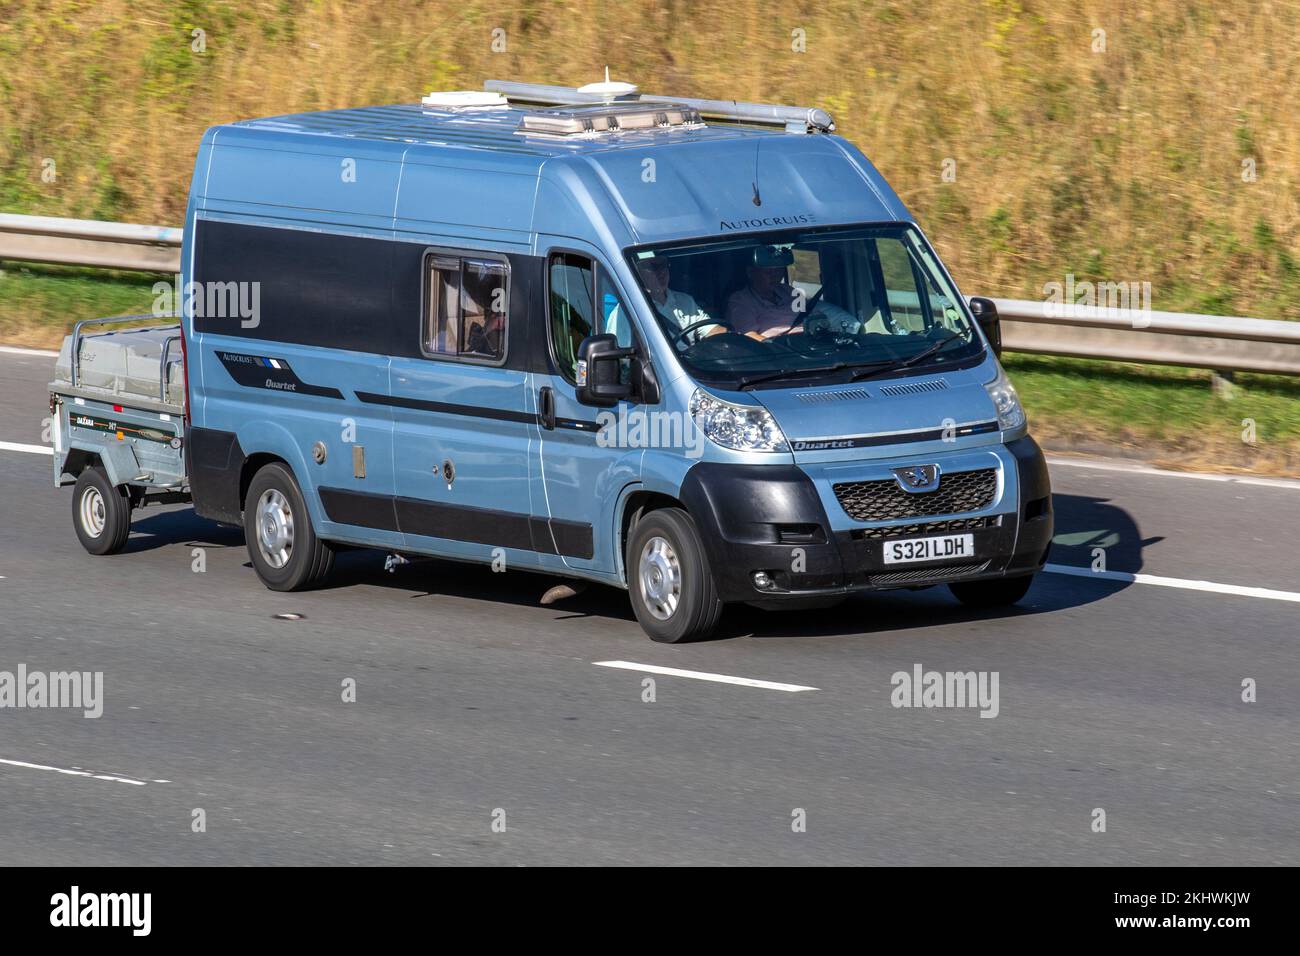 2012 Blue PEUGEOT BOXER HDI 335 ZUCKOFF TL 2198cc Diesel AutoCruis Quartet with camping trailer; travelling on the M6 motorway UK Stock Photo